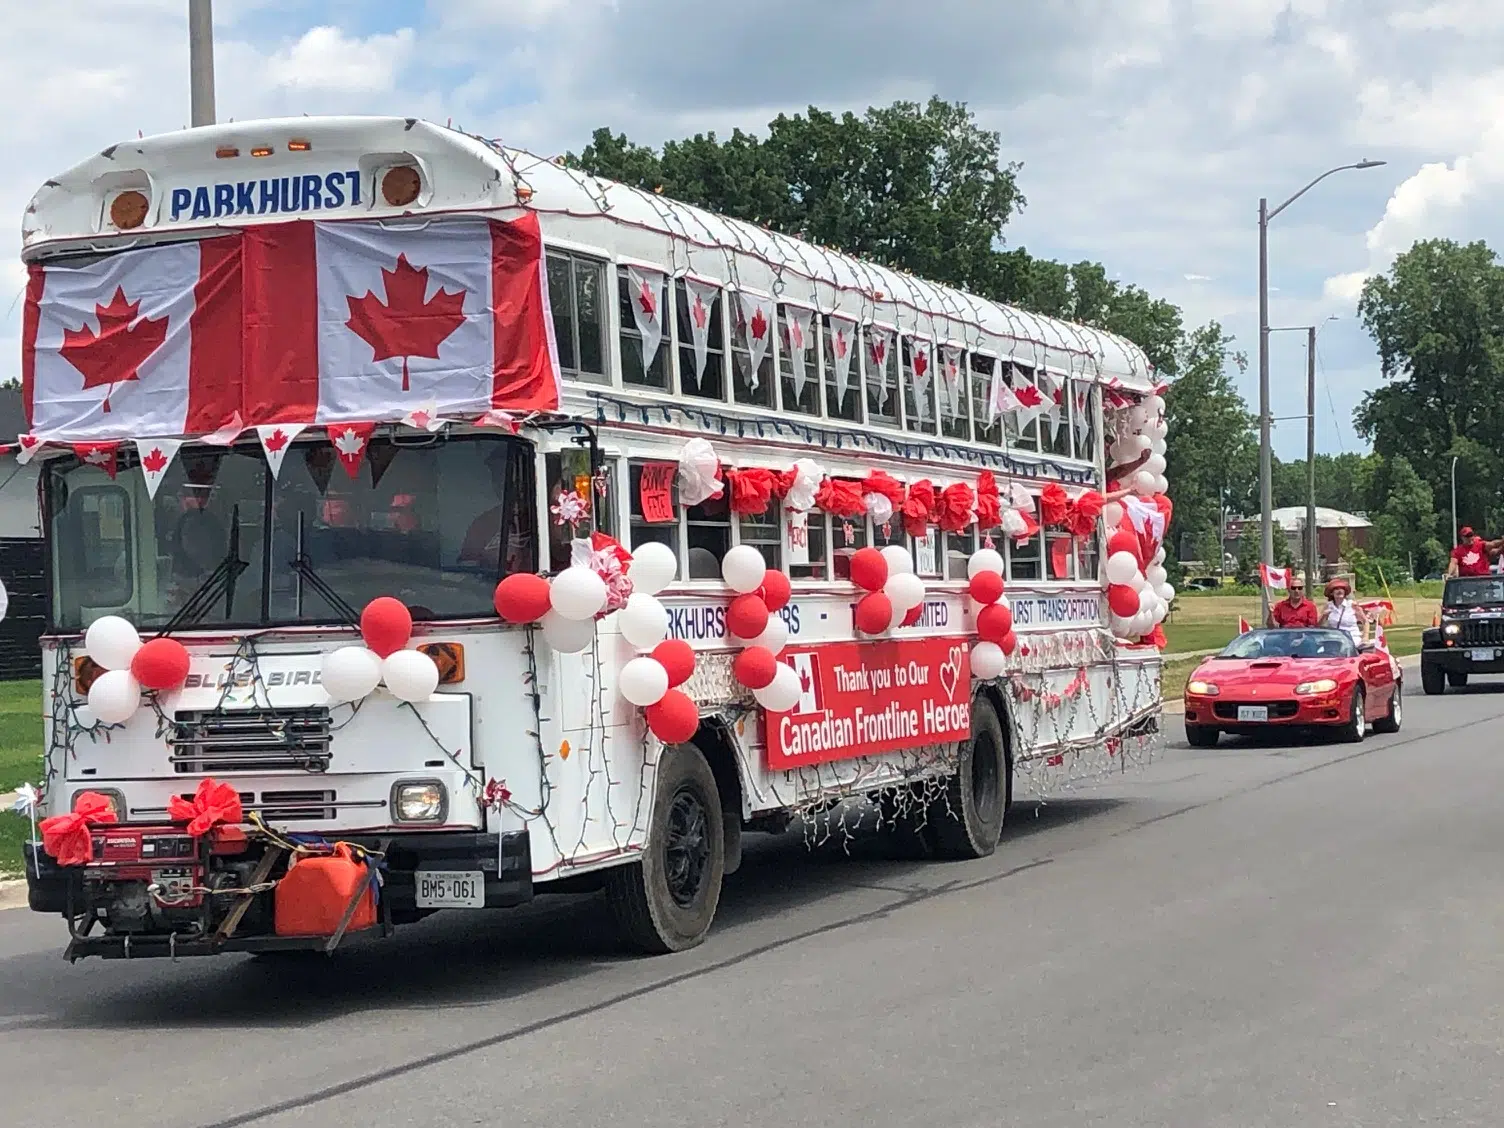 Belleville going ahead with Canada Day, while pushing for more dialogue on Indigenous issues